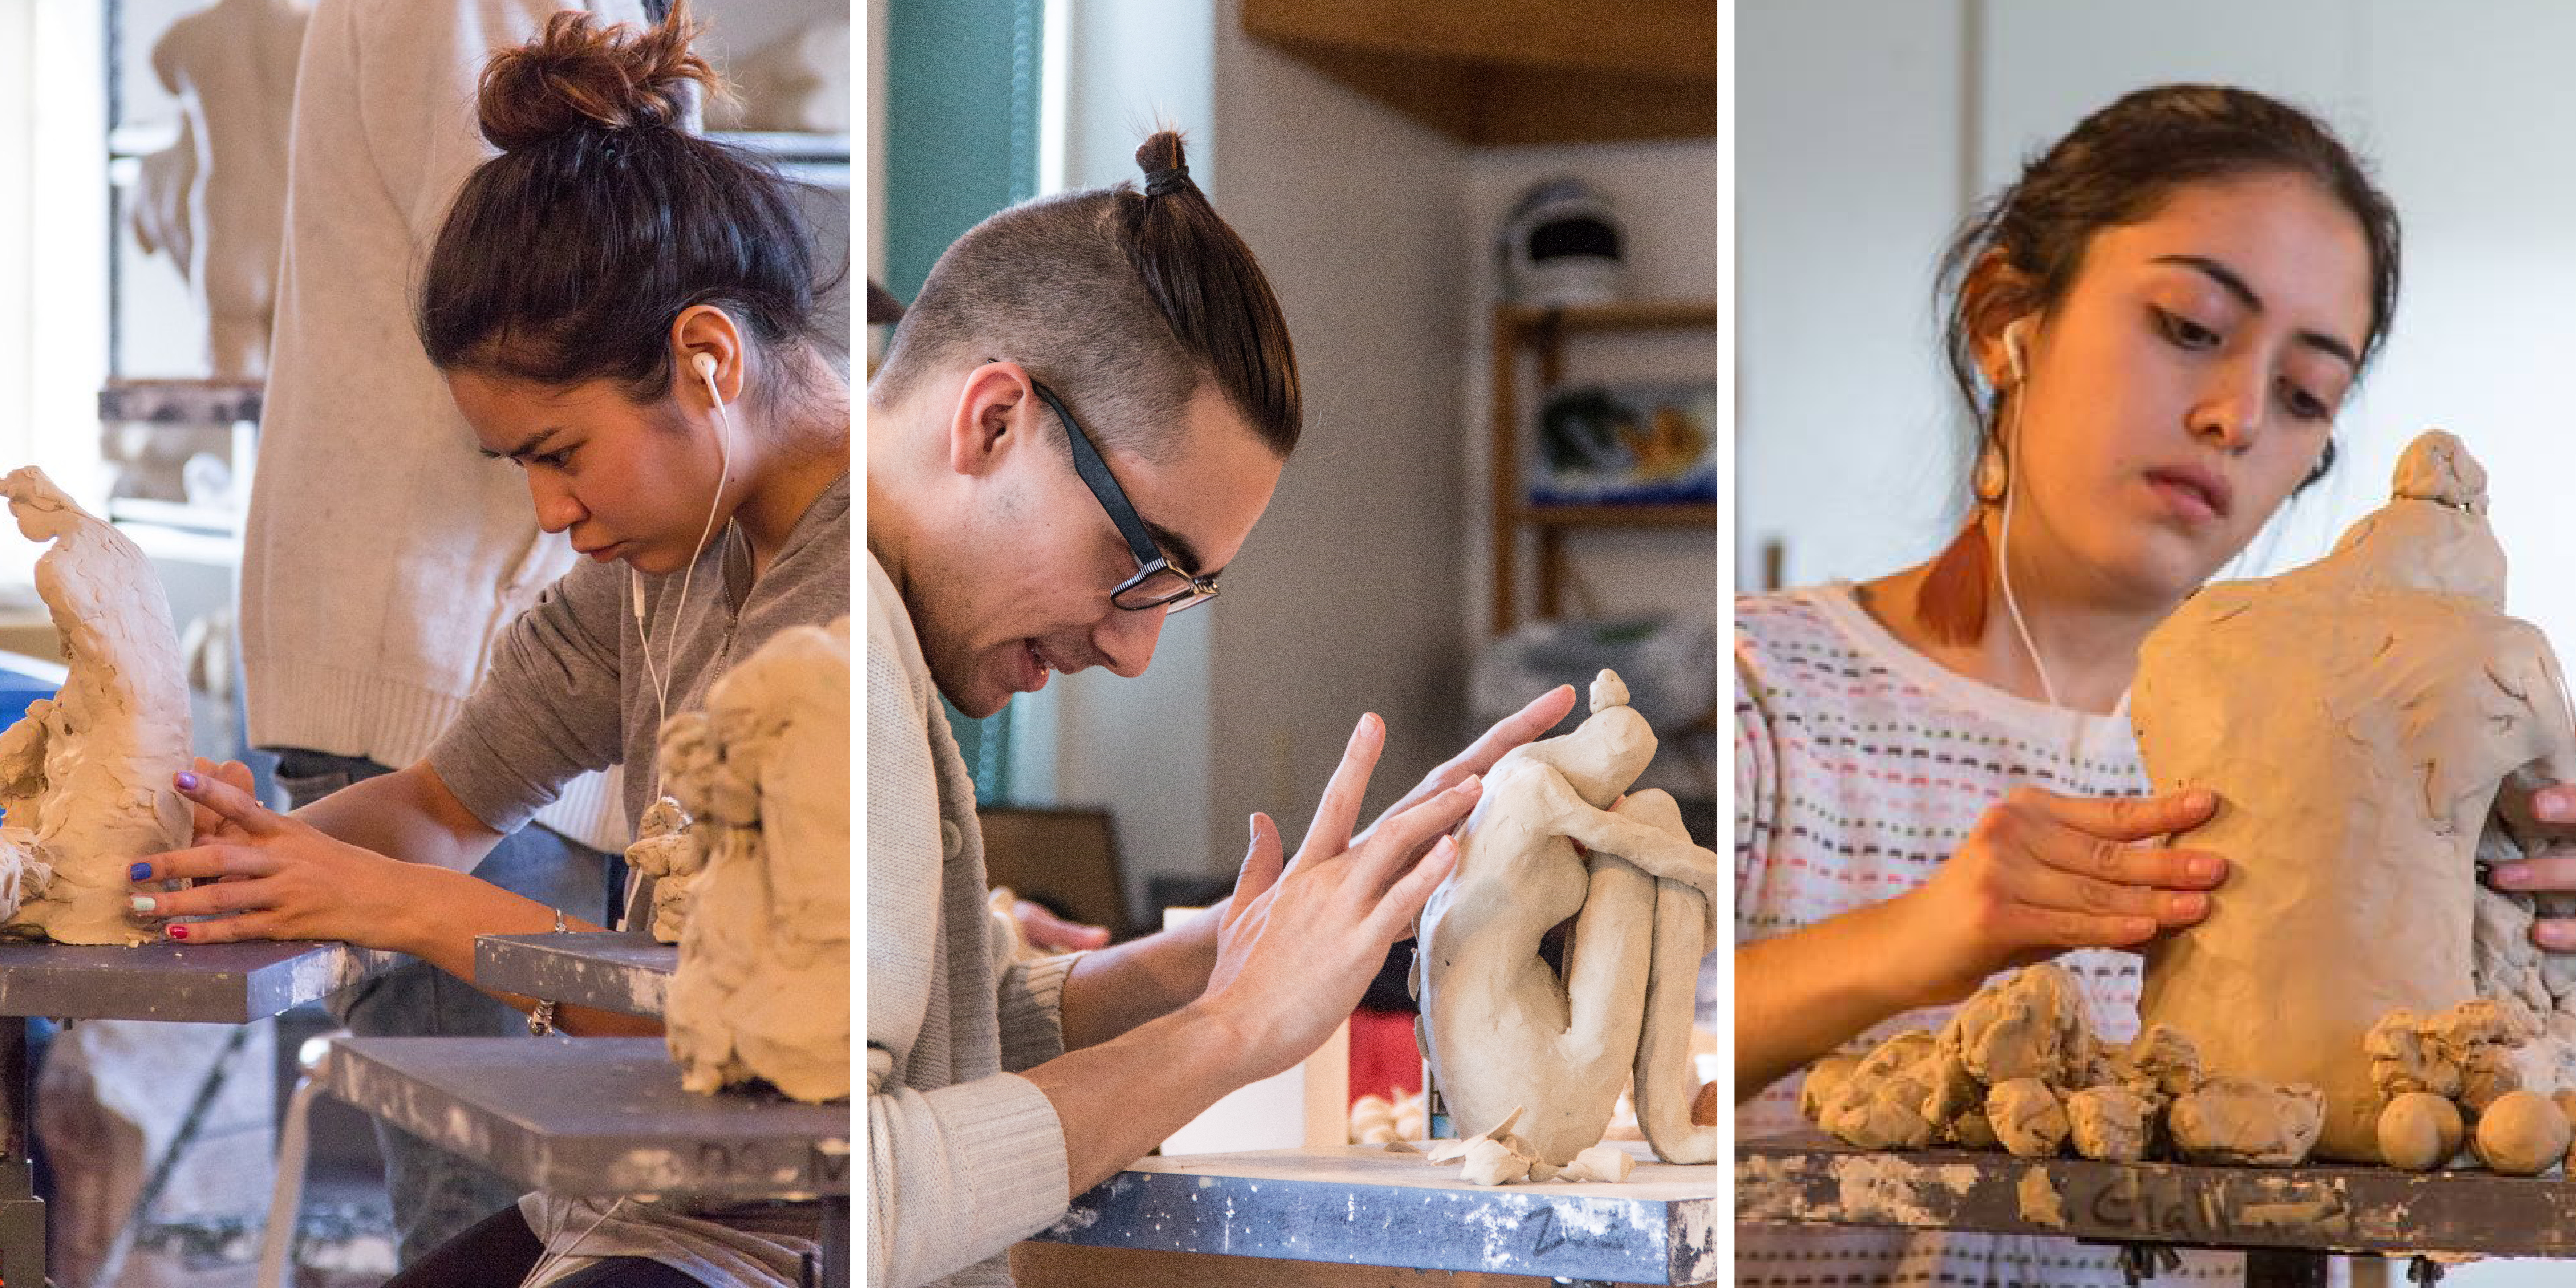 Students sculpting in clay